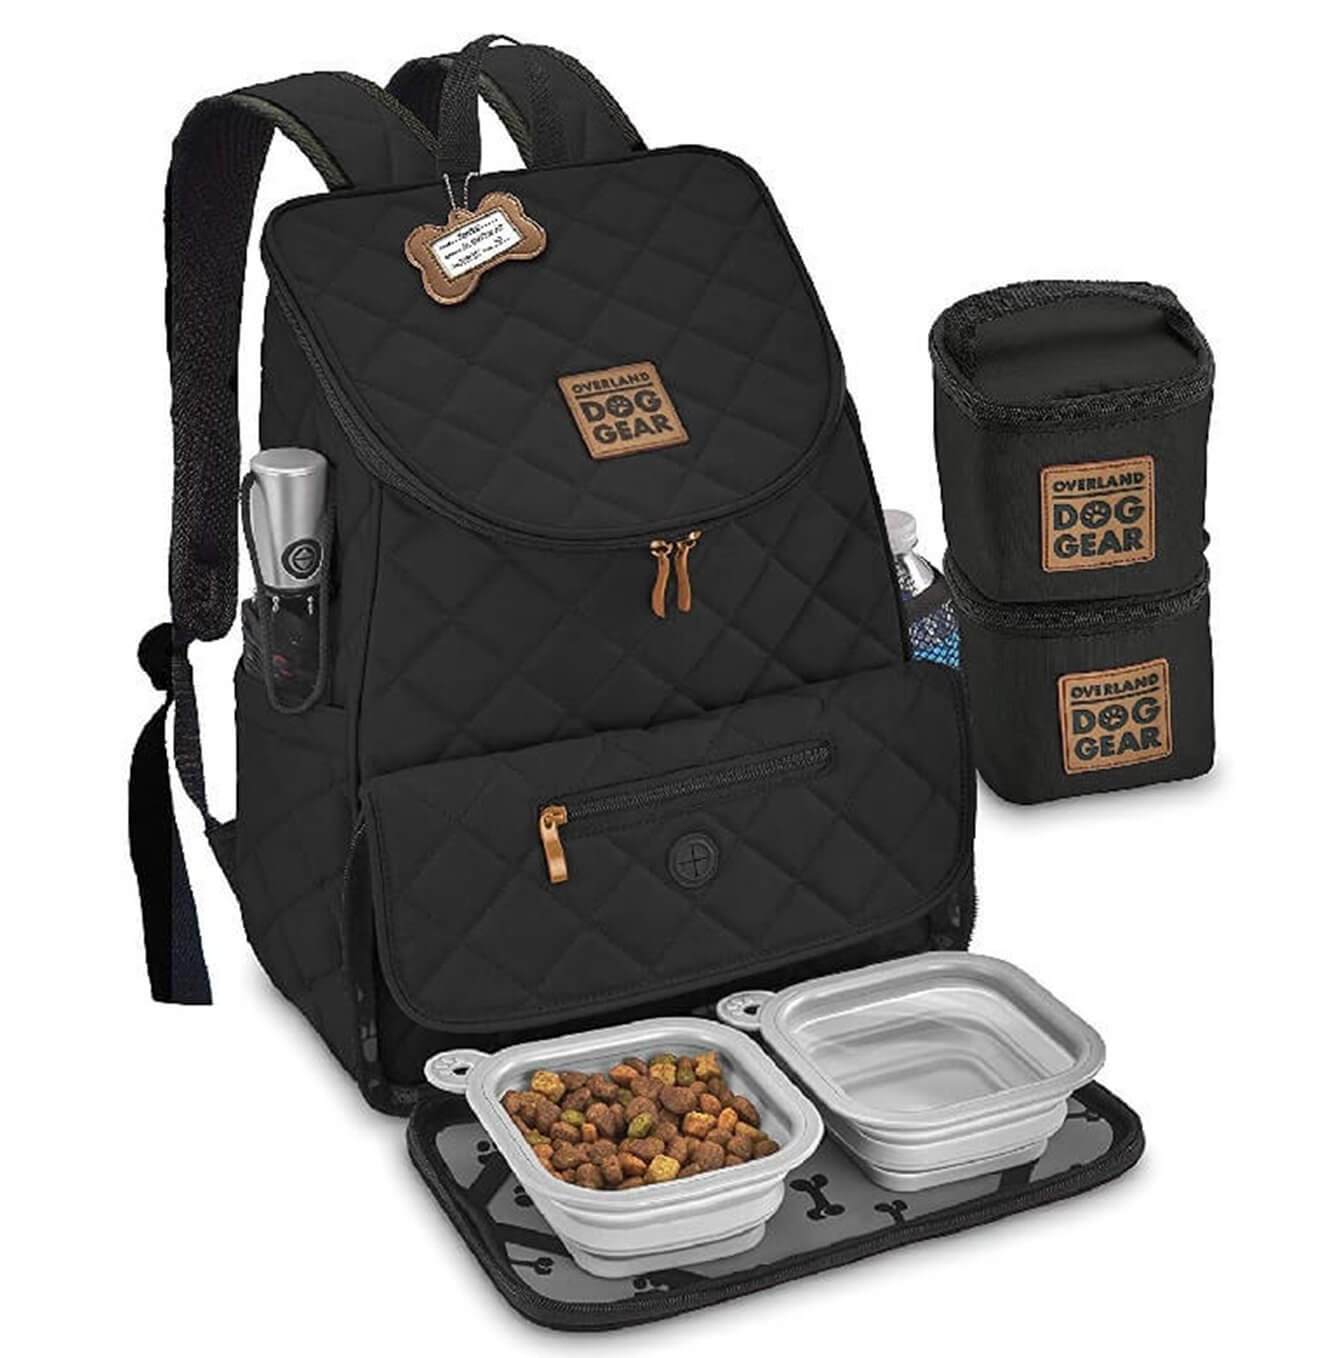 Discover, Mobile Dog Gear Weekender Backpack, in Black. The Perfect Away Bag for any Pet Parent, Featuring dividers to stack food and built in waste bag dispenser. Also Included feeding set, collapsible silicone bowls and placemat! The Perfect Gift For travel, meets airline requirements. Available Now at Lords & Labradors US